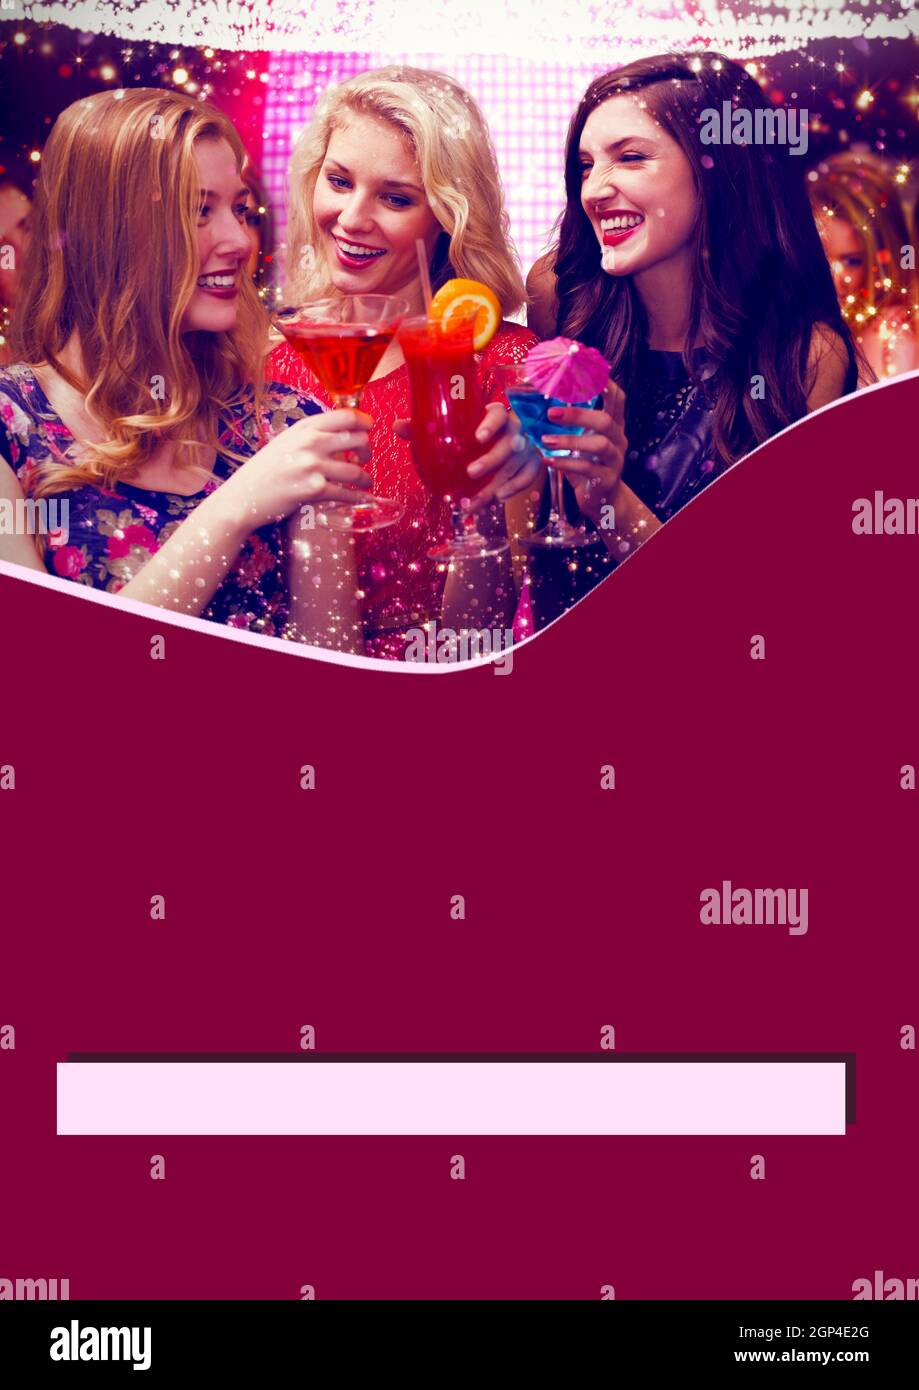 Composition of group of happy female friends with drinks on red background Stock Photo